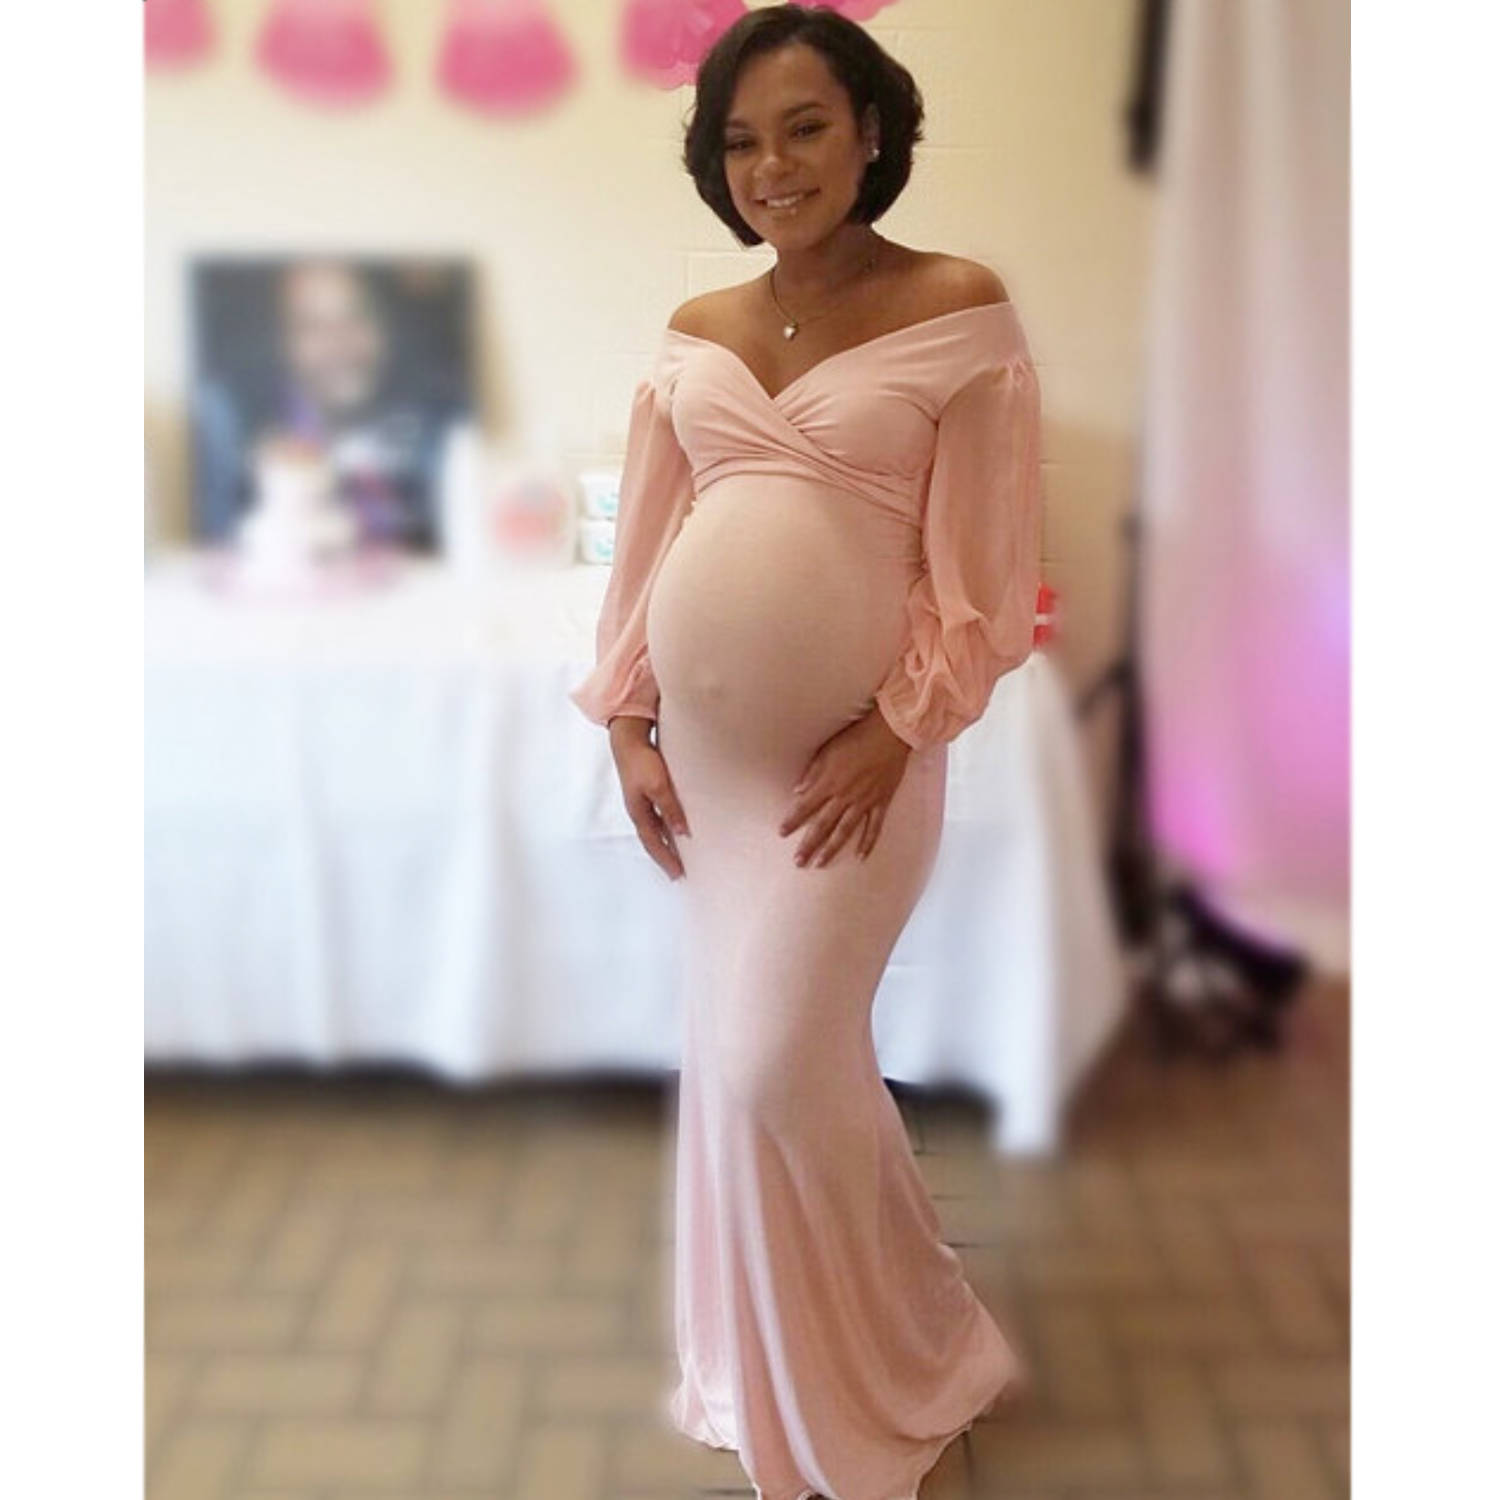 Full Size of Baby Shower:maternity Boutique Cute Maternity Dresses For Baby Shower Affordable Maternity Dresses For Baby Shower What To Wear To My Baby Shower A Pea In The Pod Maternity Clothes Maternity Dresses Formal 2 Searches Left. What Should I Wear To My Baby Shower